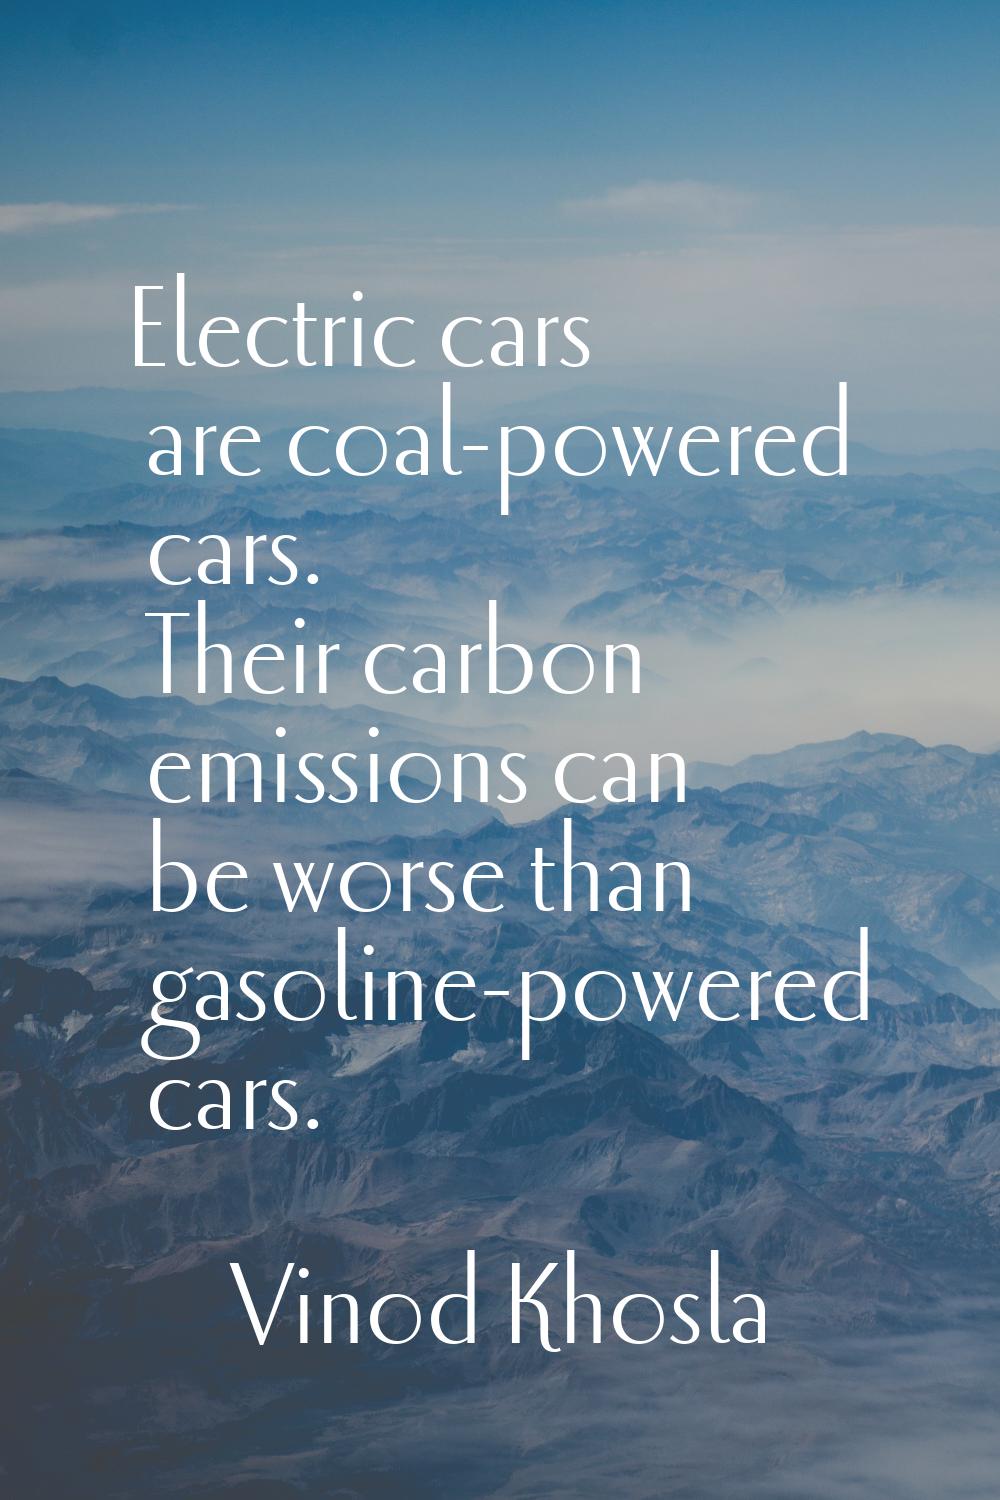 Electric cars are coal-powered cars. Their carbon emissions can be worse than gasoline-powered cars